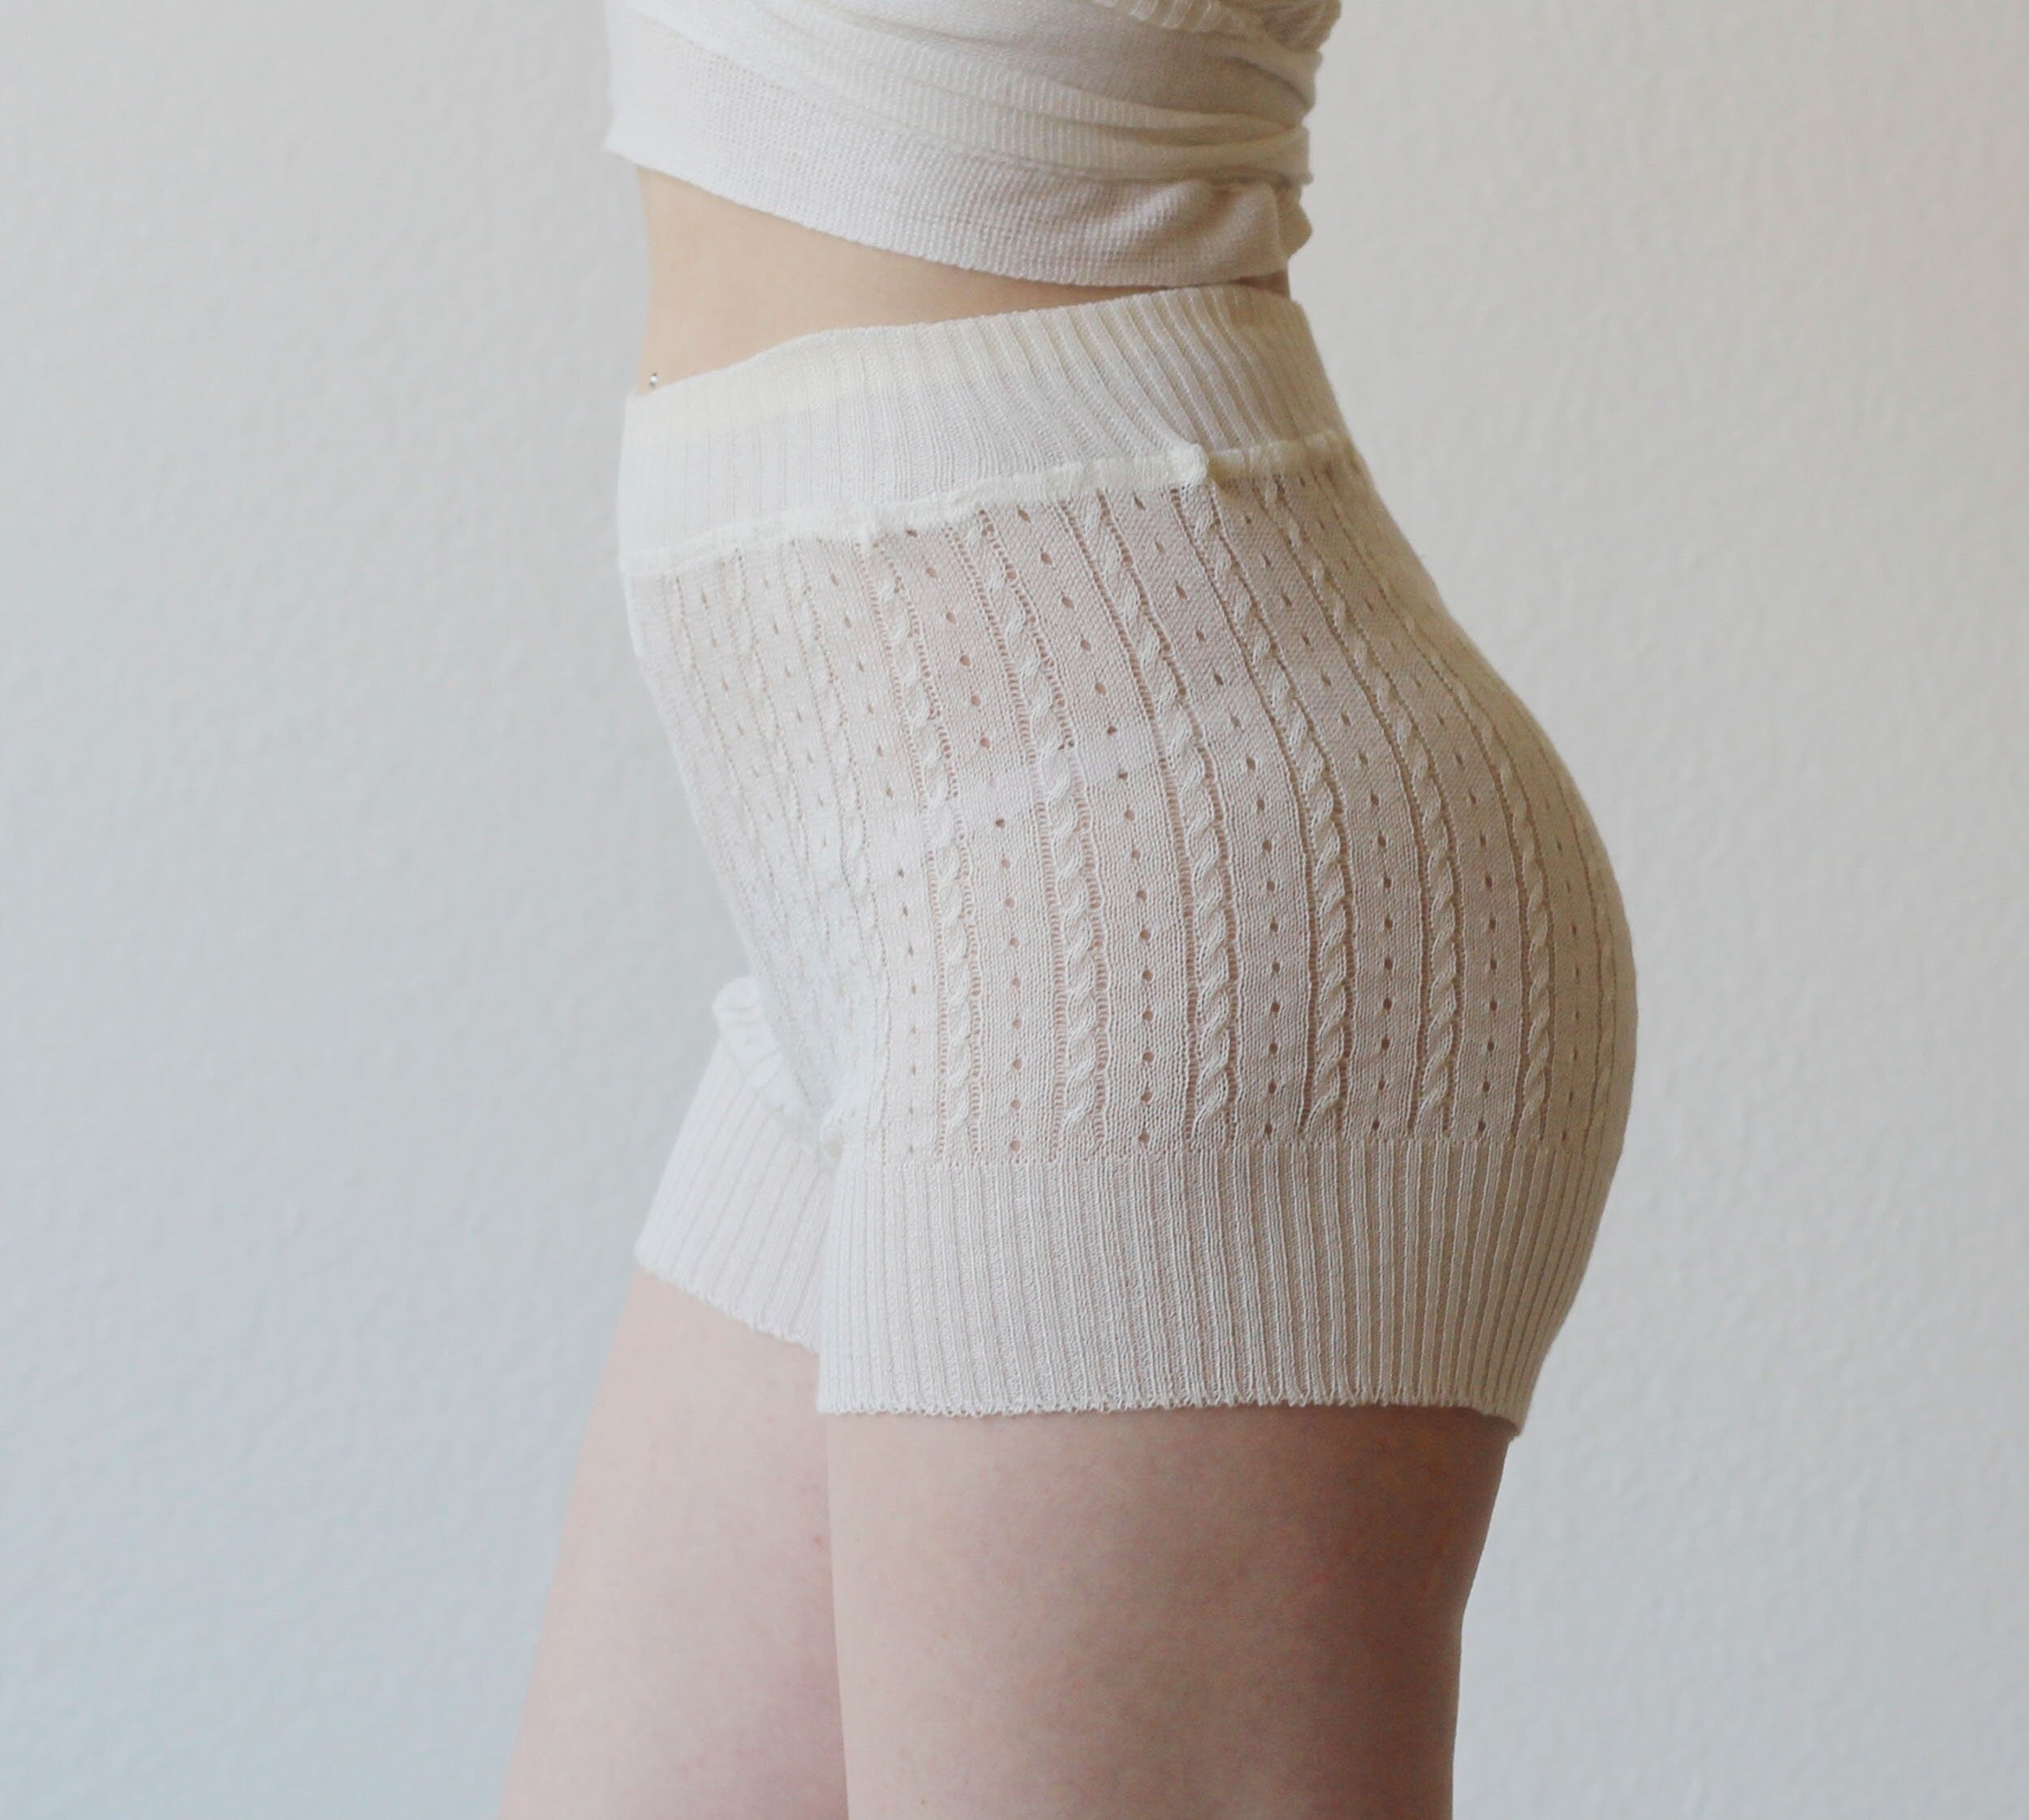 silk and cashmere knit tap pant shorts in sheer pointelle lace knit - Ready to Ship, Various Sizes, Ivory